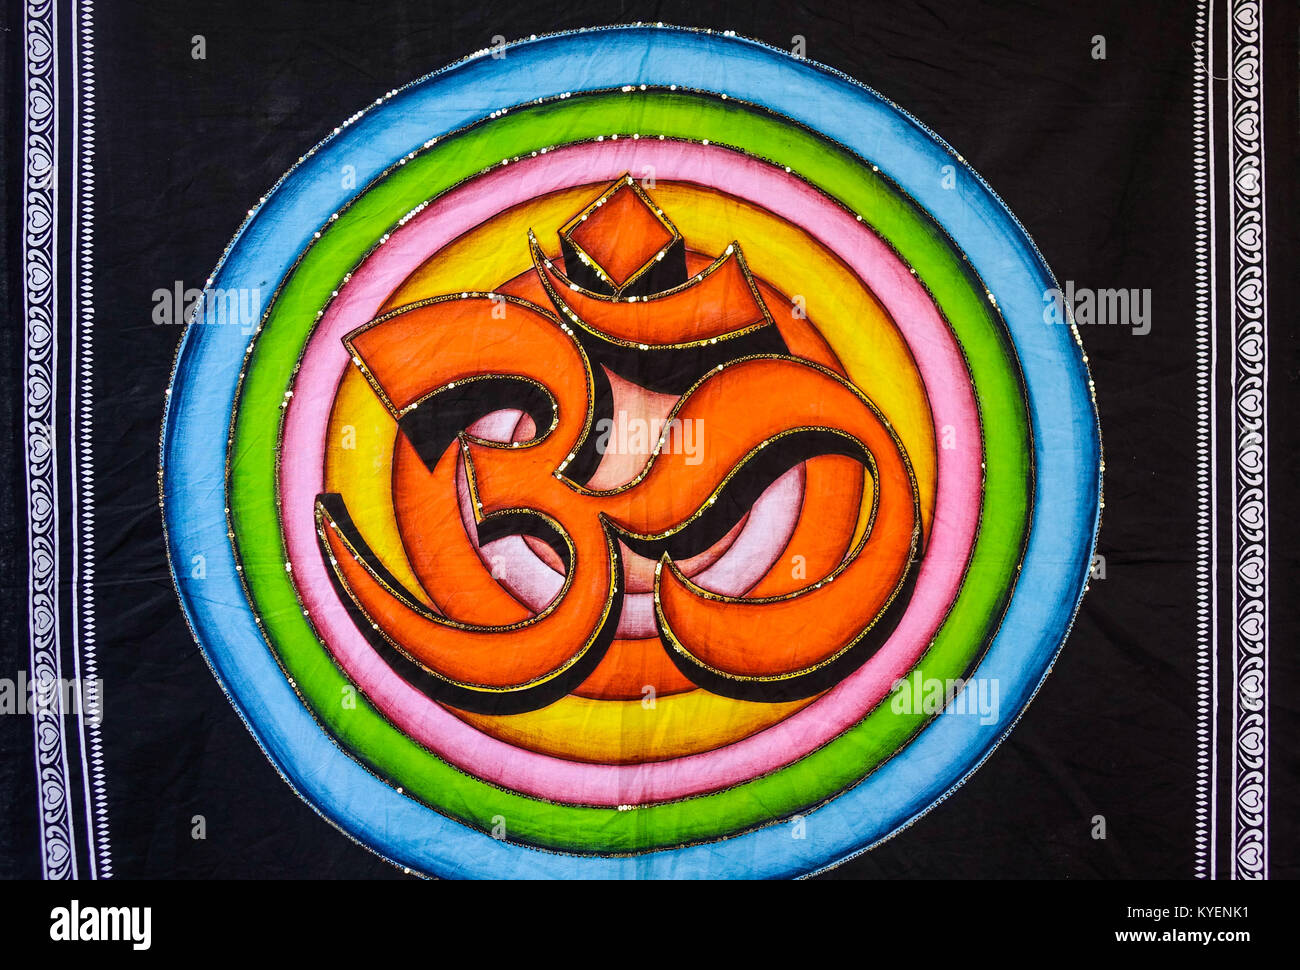 Oum or aum symbol painted on black fabric cloth in orange,  blue, green, pink colors. Stock Photo